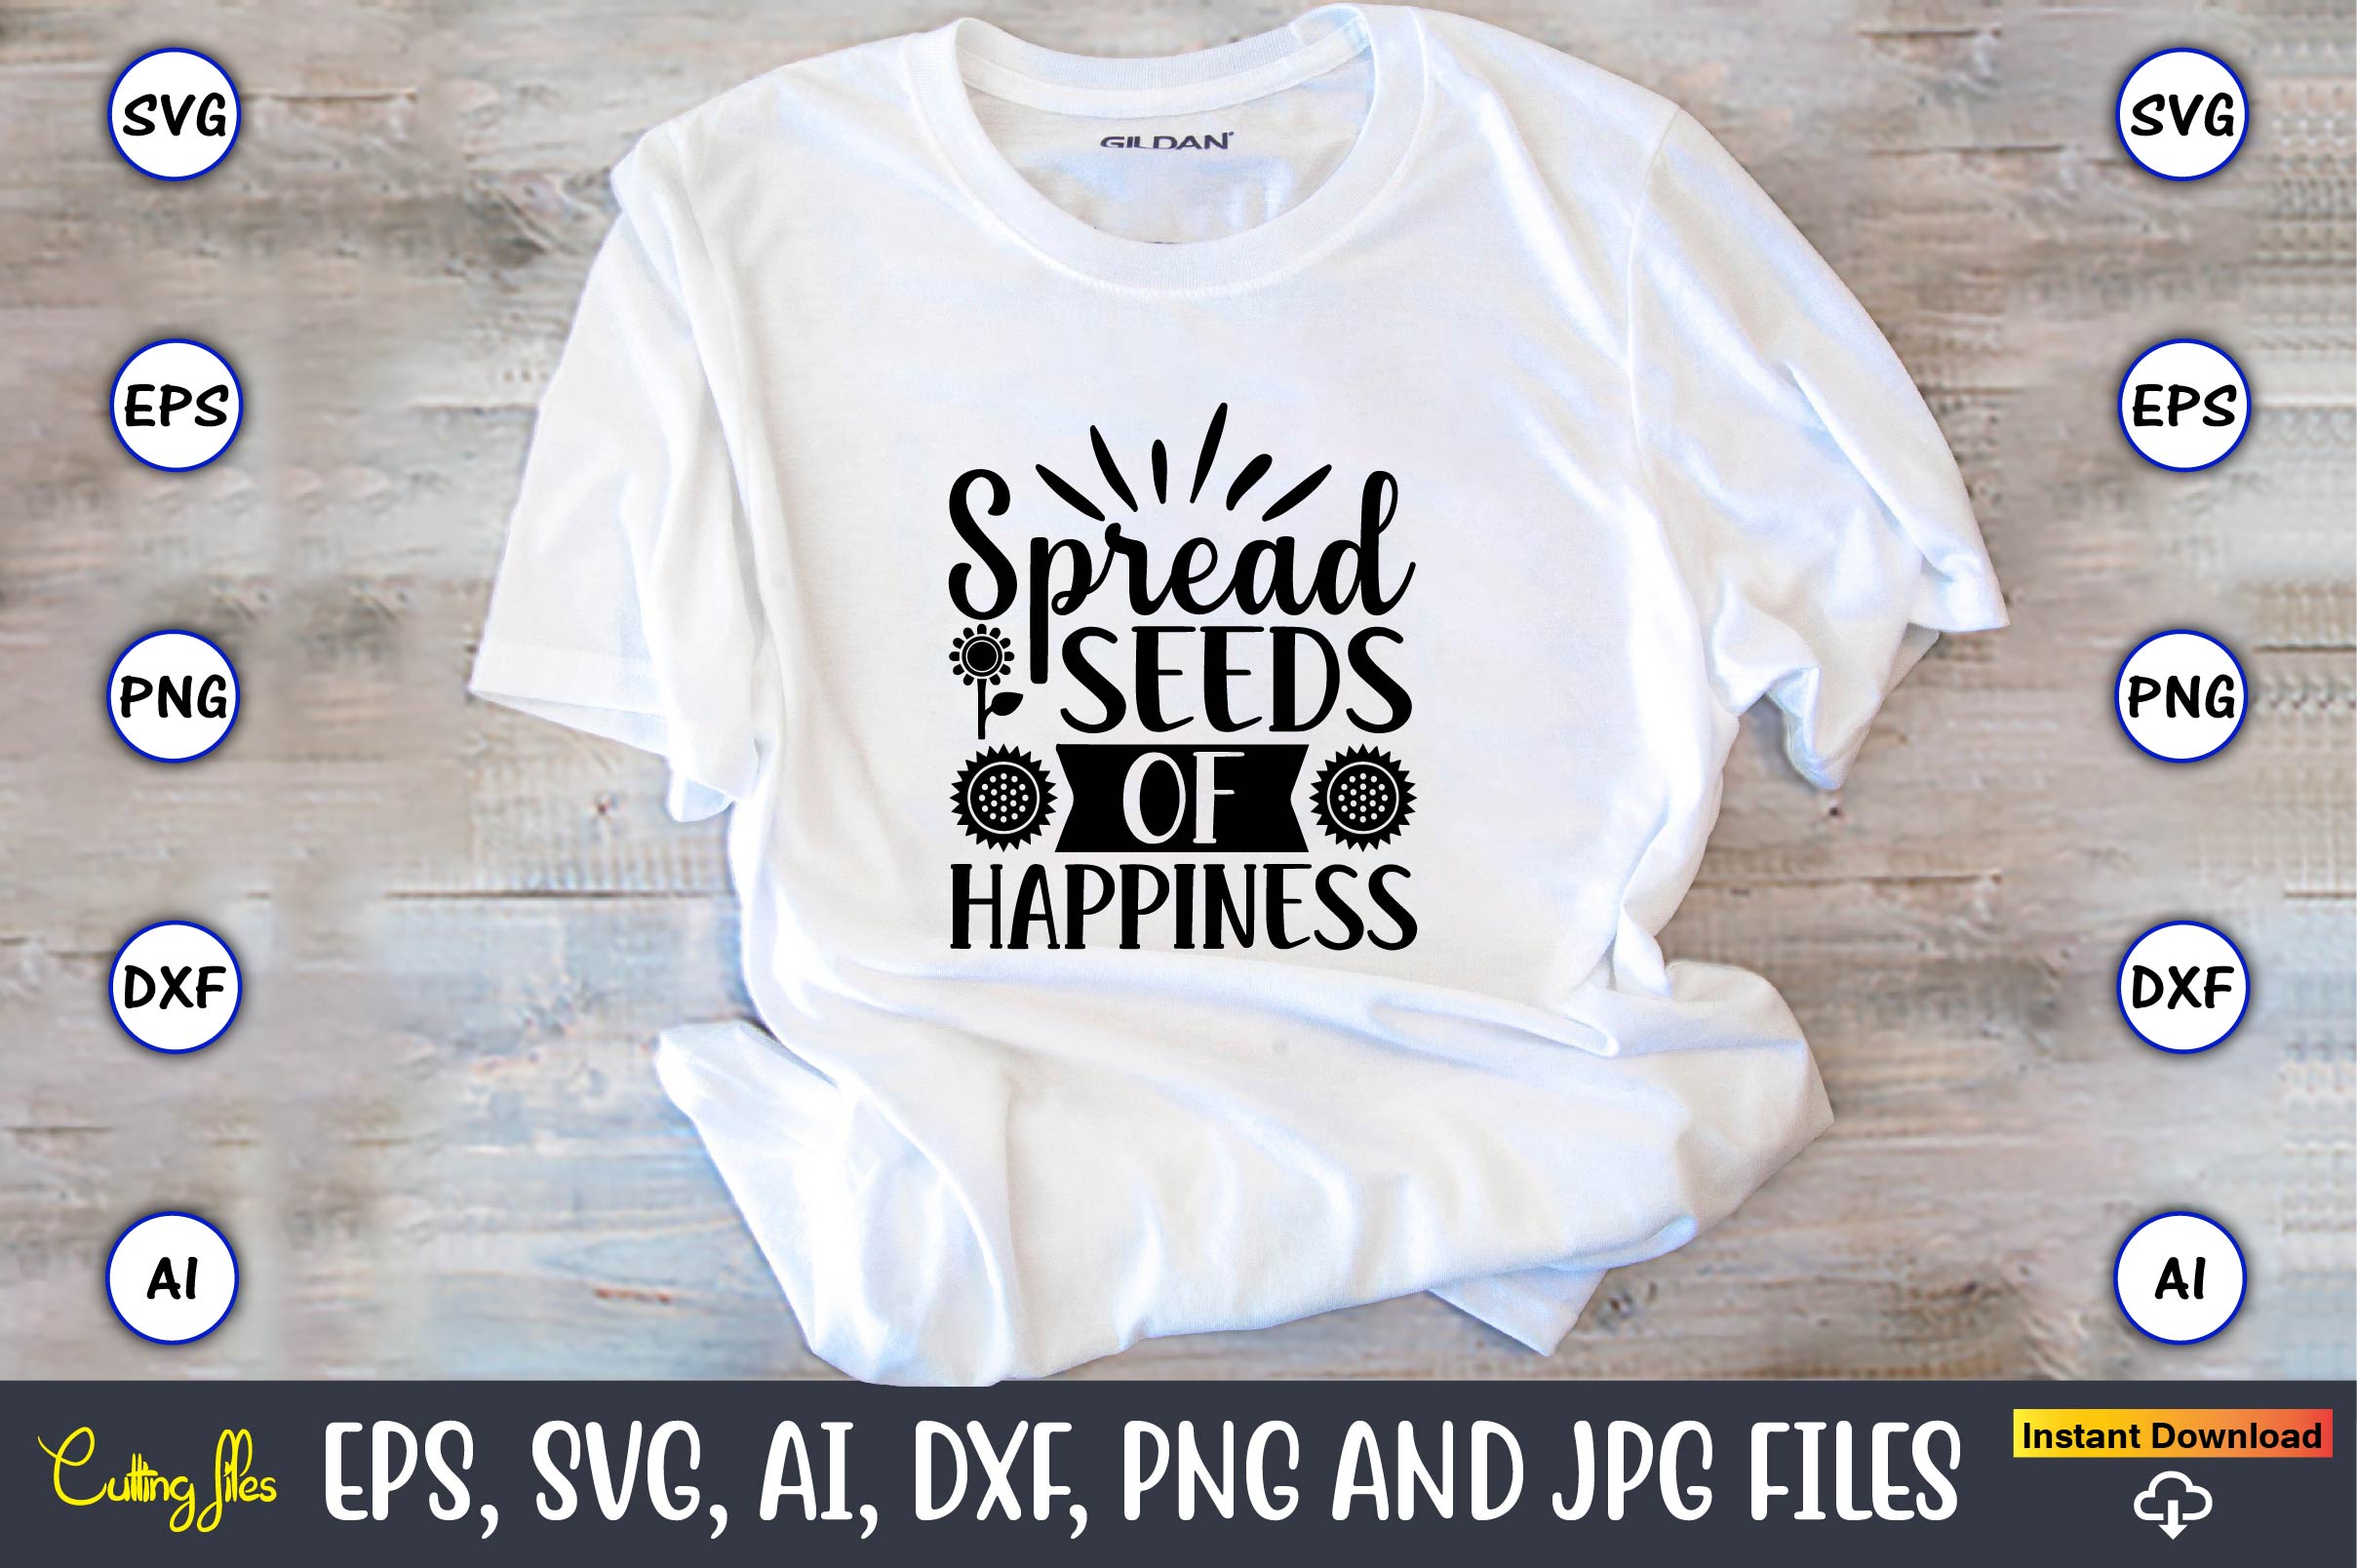 Image of a white t-shirt with an irresistible slogan Spread seeds of happiness.